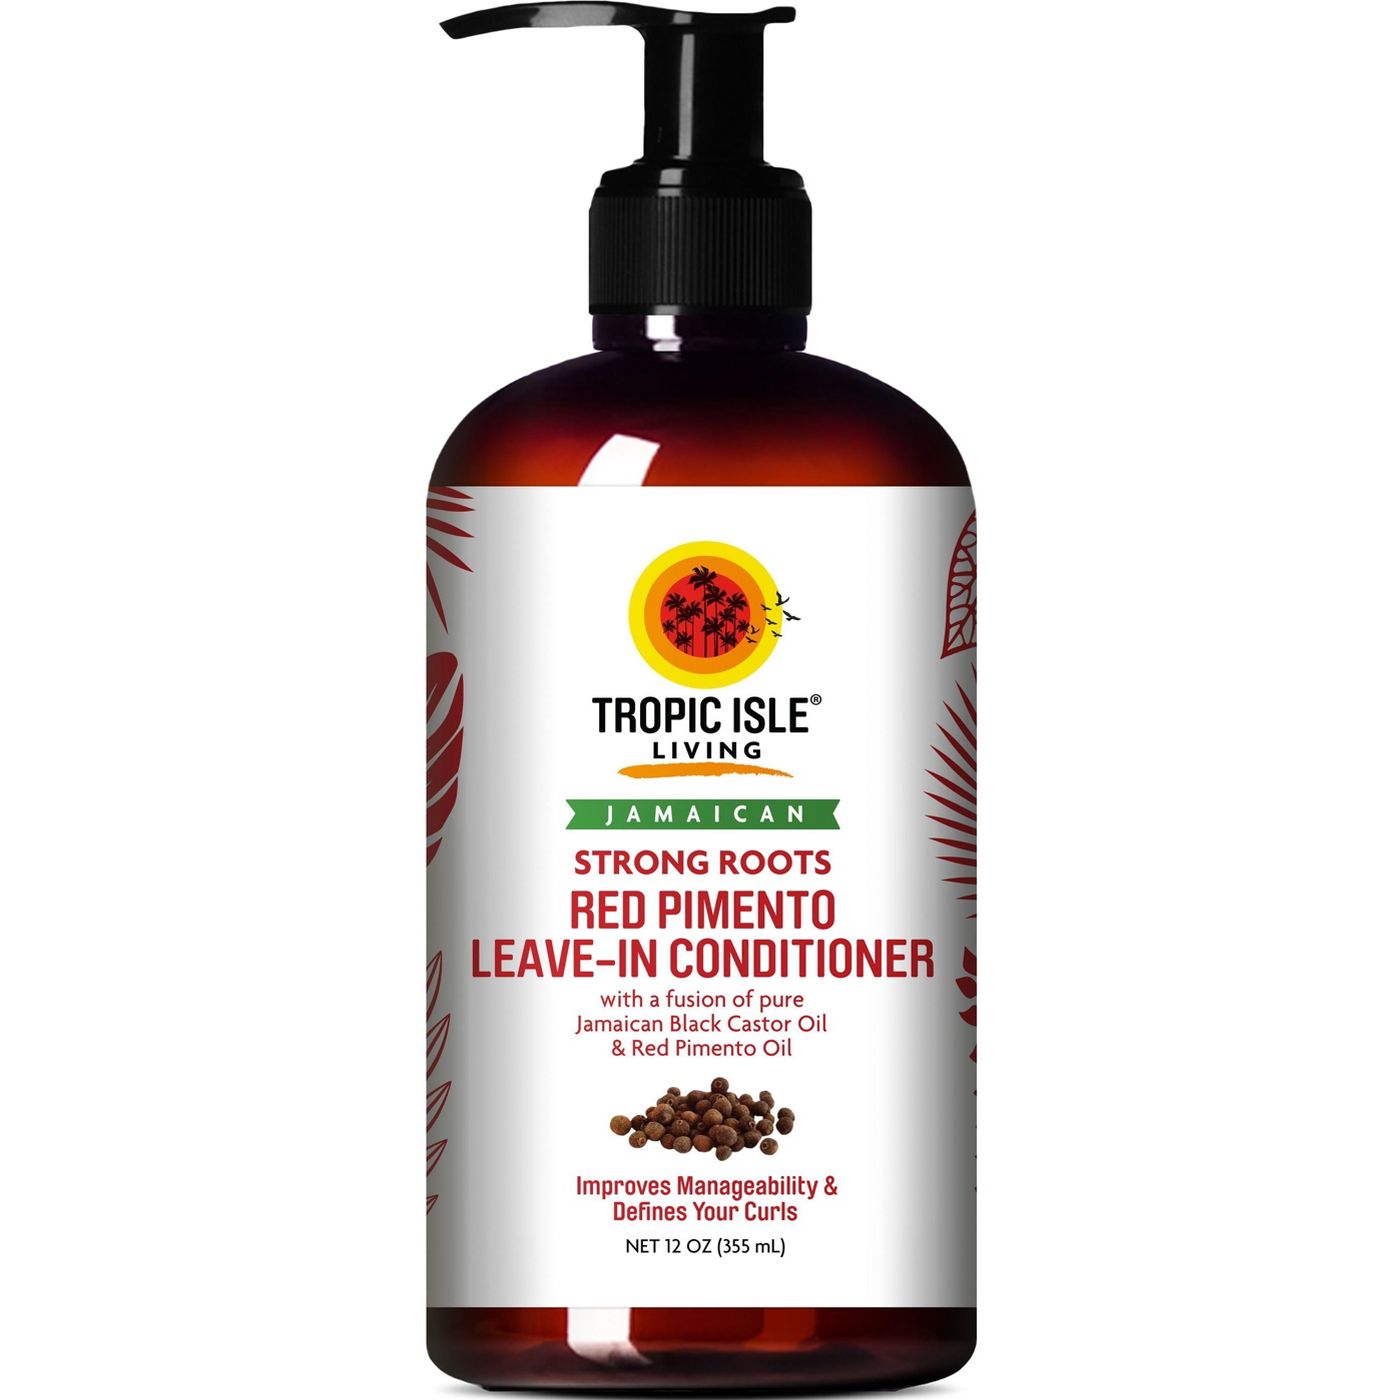 4th Ave Market: Tropic Isle Living Jamaican Strong Roots Red Pimento Edge Leave-in Conditioner - 12o